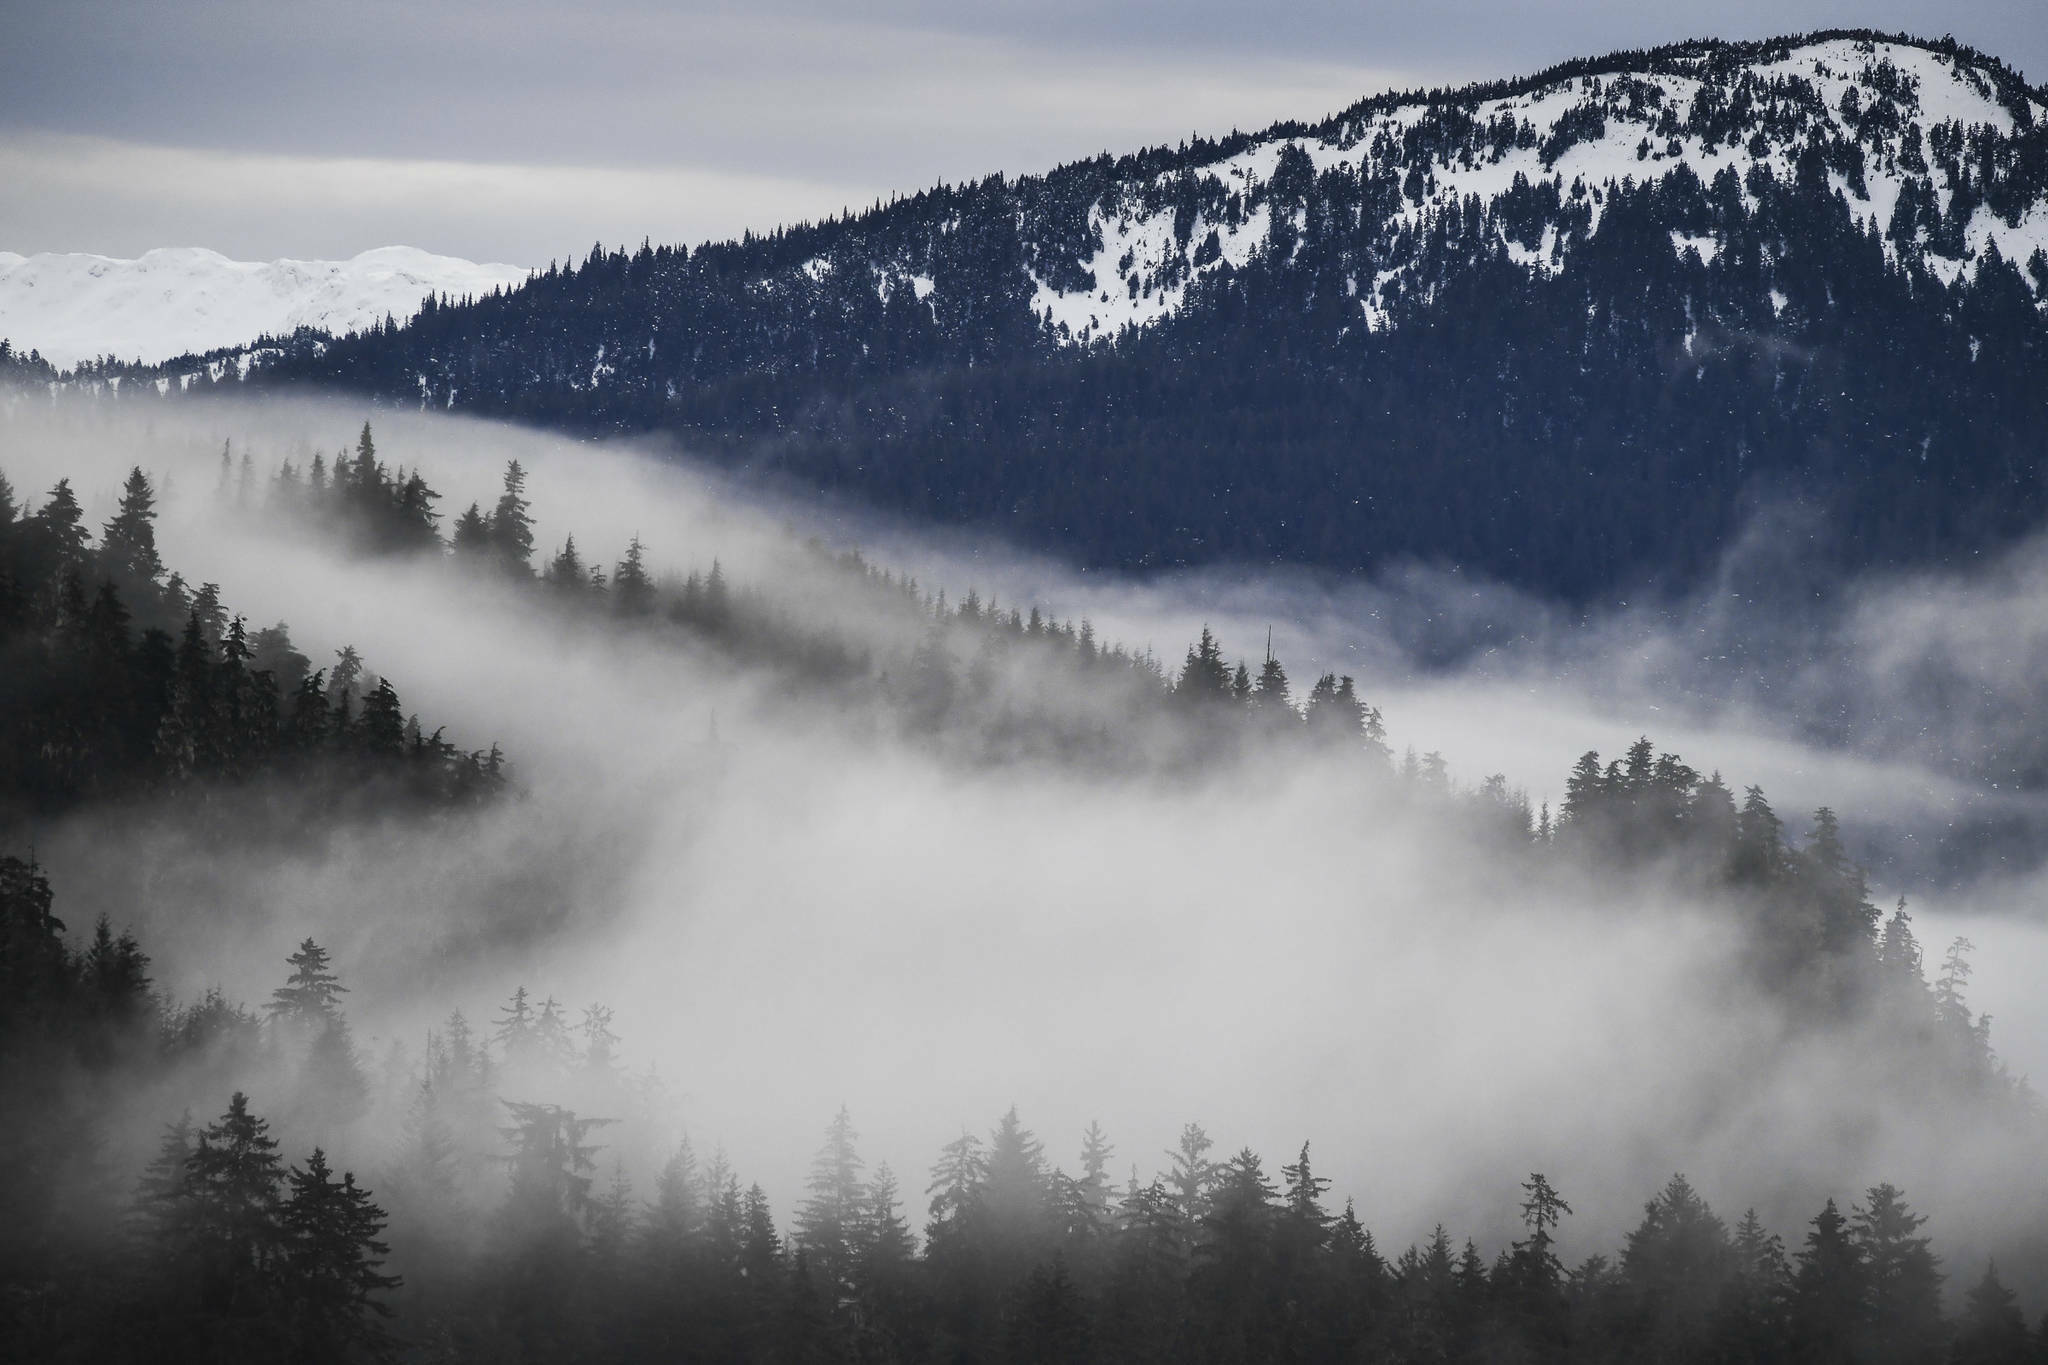 Fog drifts through the trees in the Tongass National Forest on Monday, Dec. 9, 2019. (Michael Penn / Juneau Empire file photo)